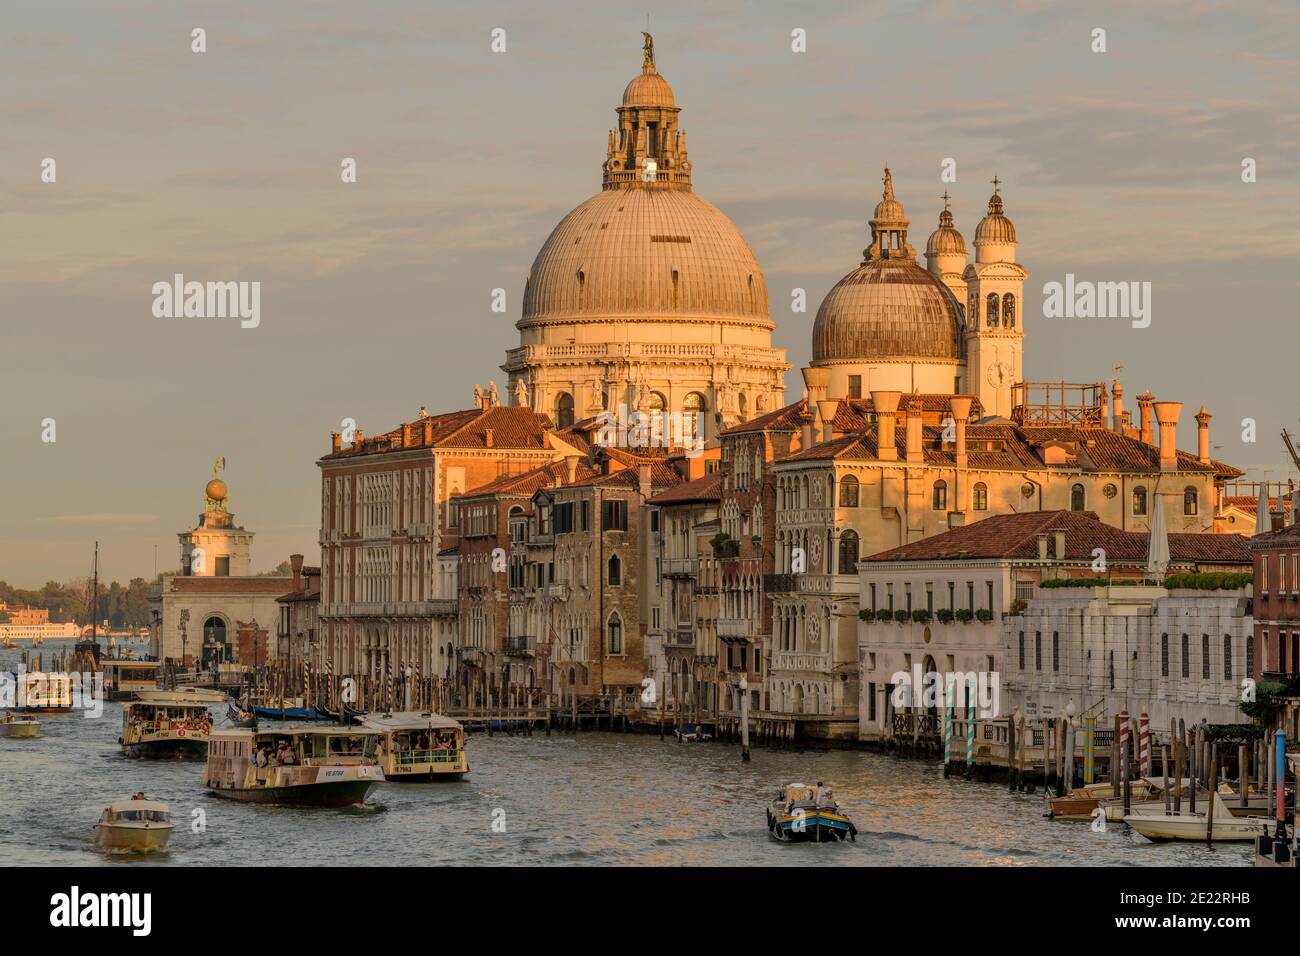 Sunset Grand Canal - Evening sunlight shines on domes of Basilica of Santa Maria della Salute, at south entrance of Grand Canal, Venice, Italy. Stock Photo